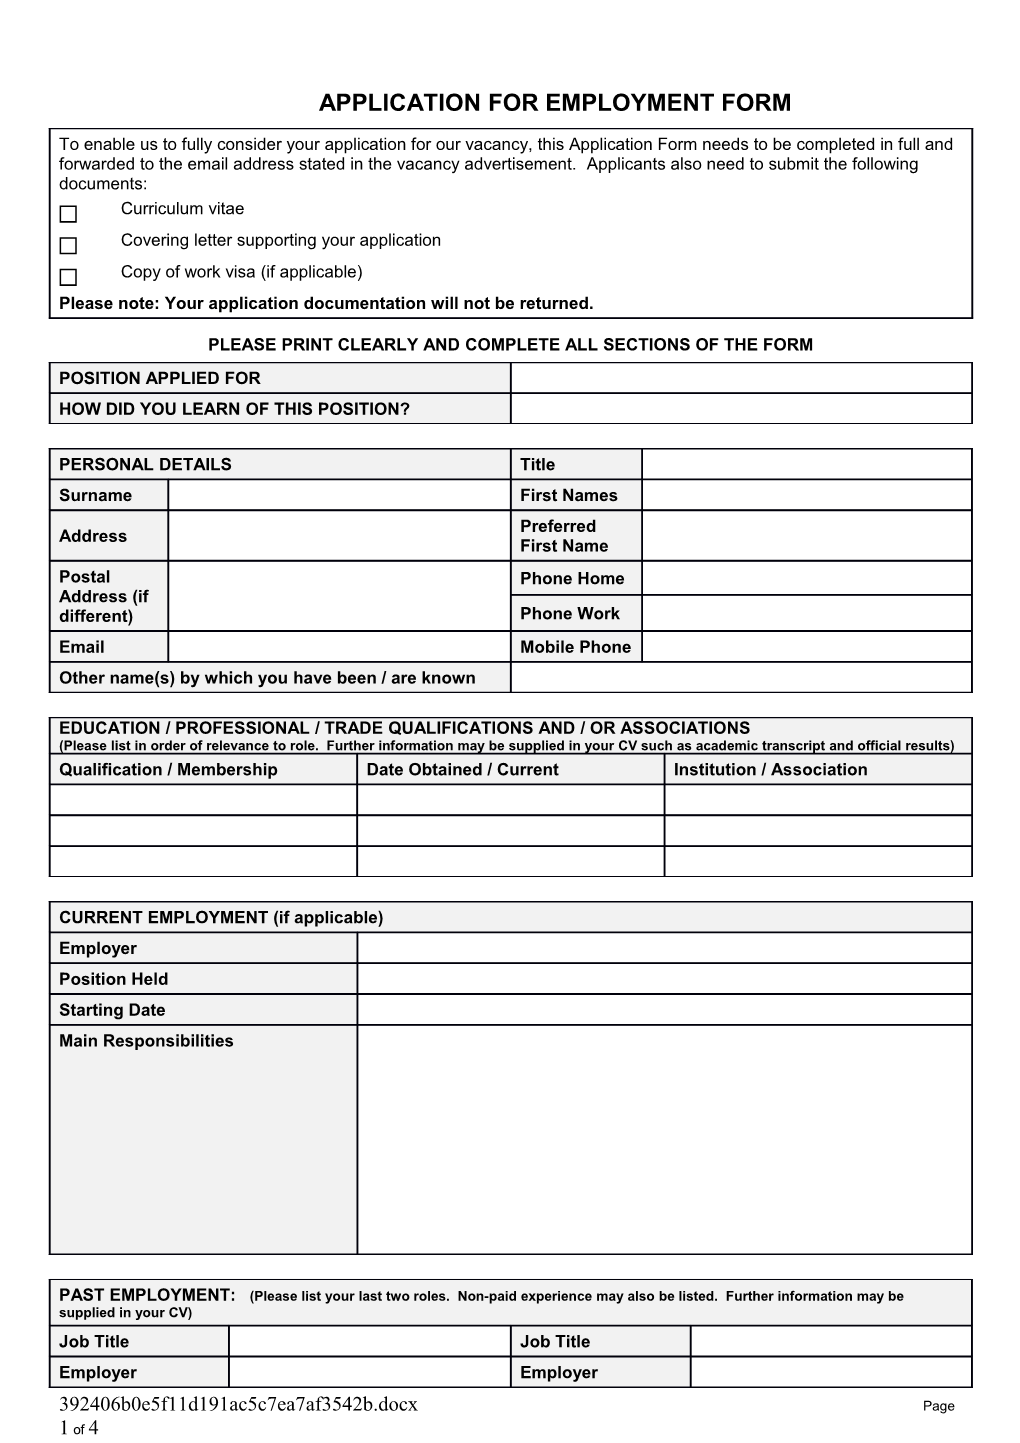 Please Print Clearly and Complete All Sections of the Form